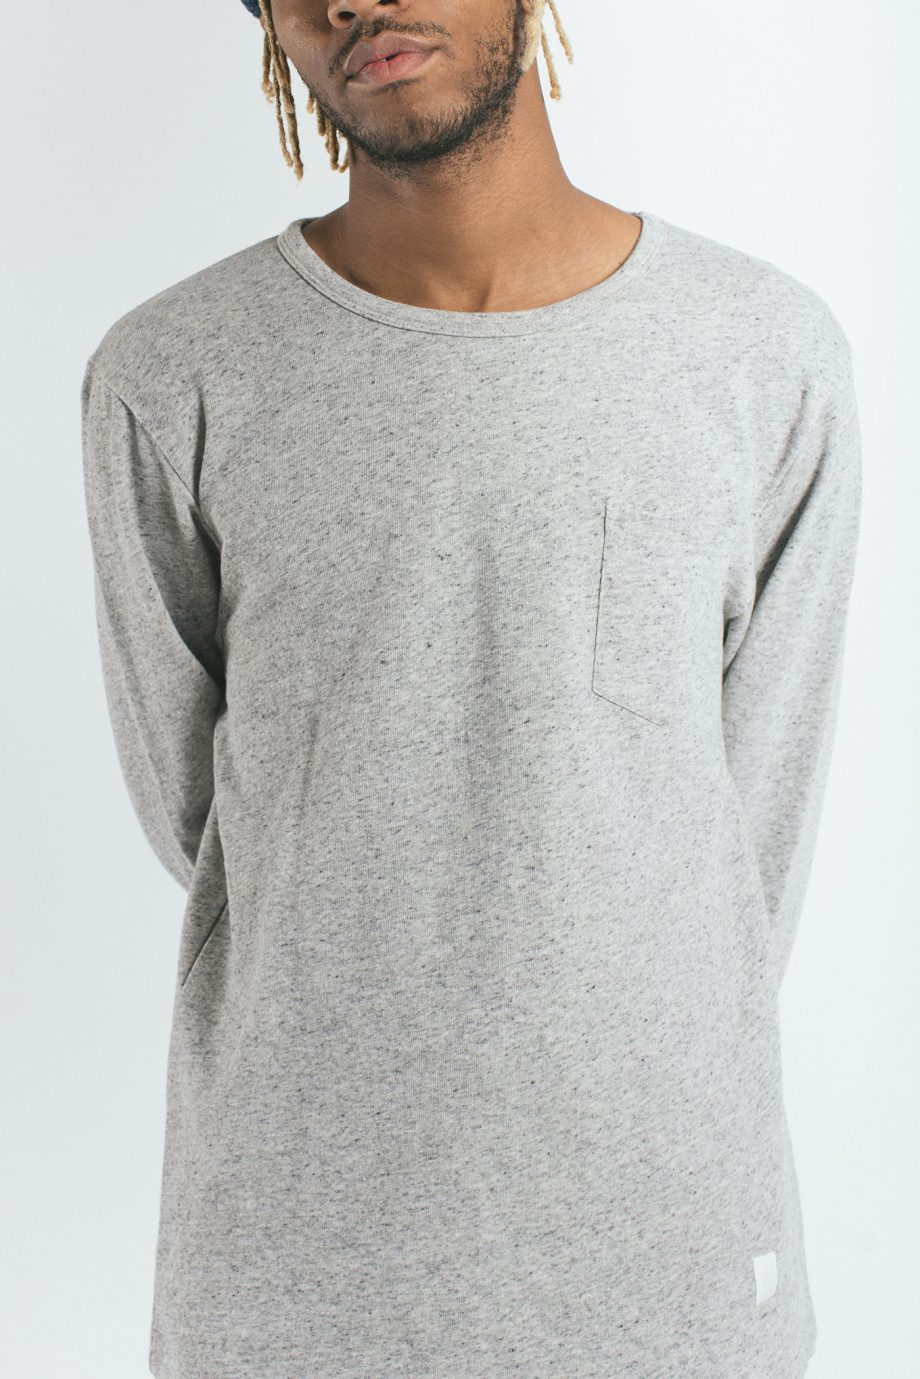 Appell French Terry LS Tee